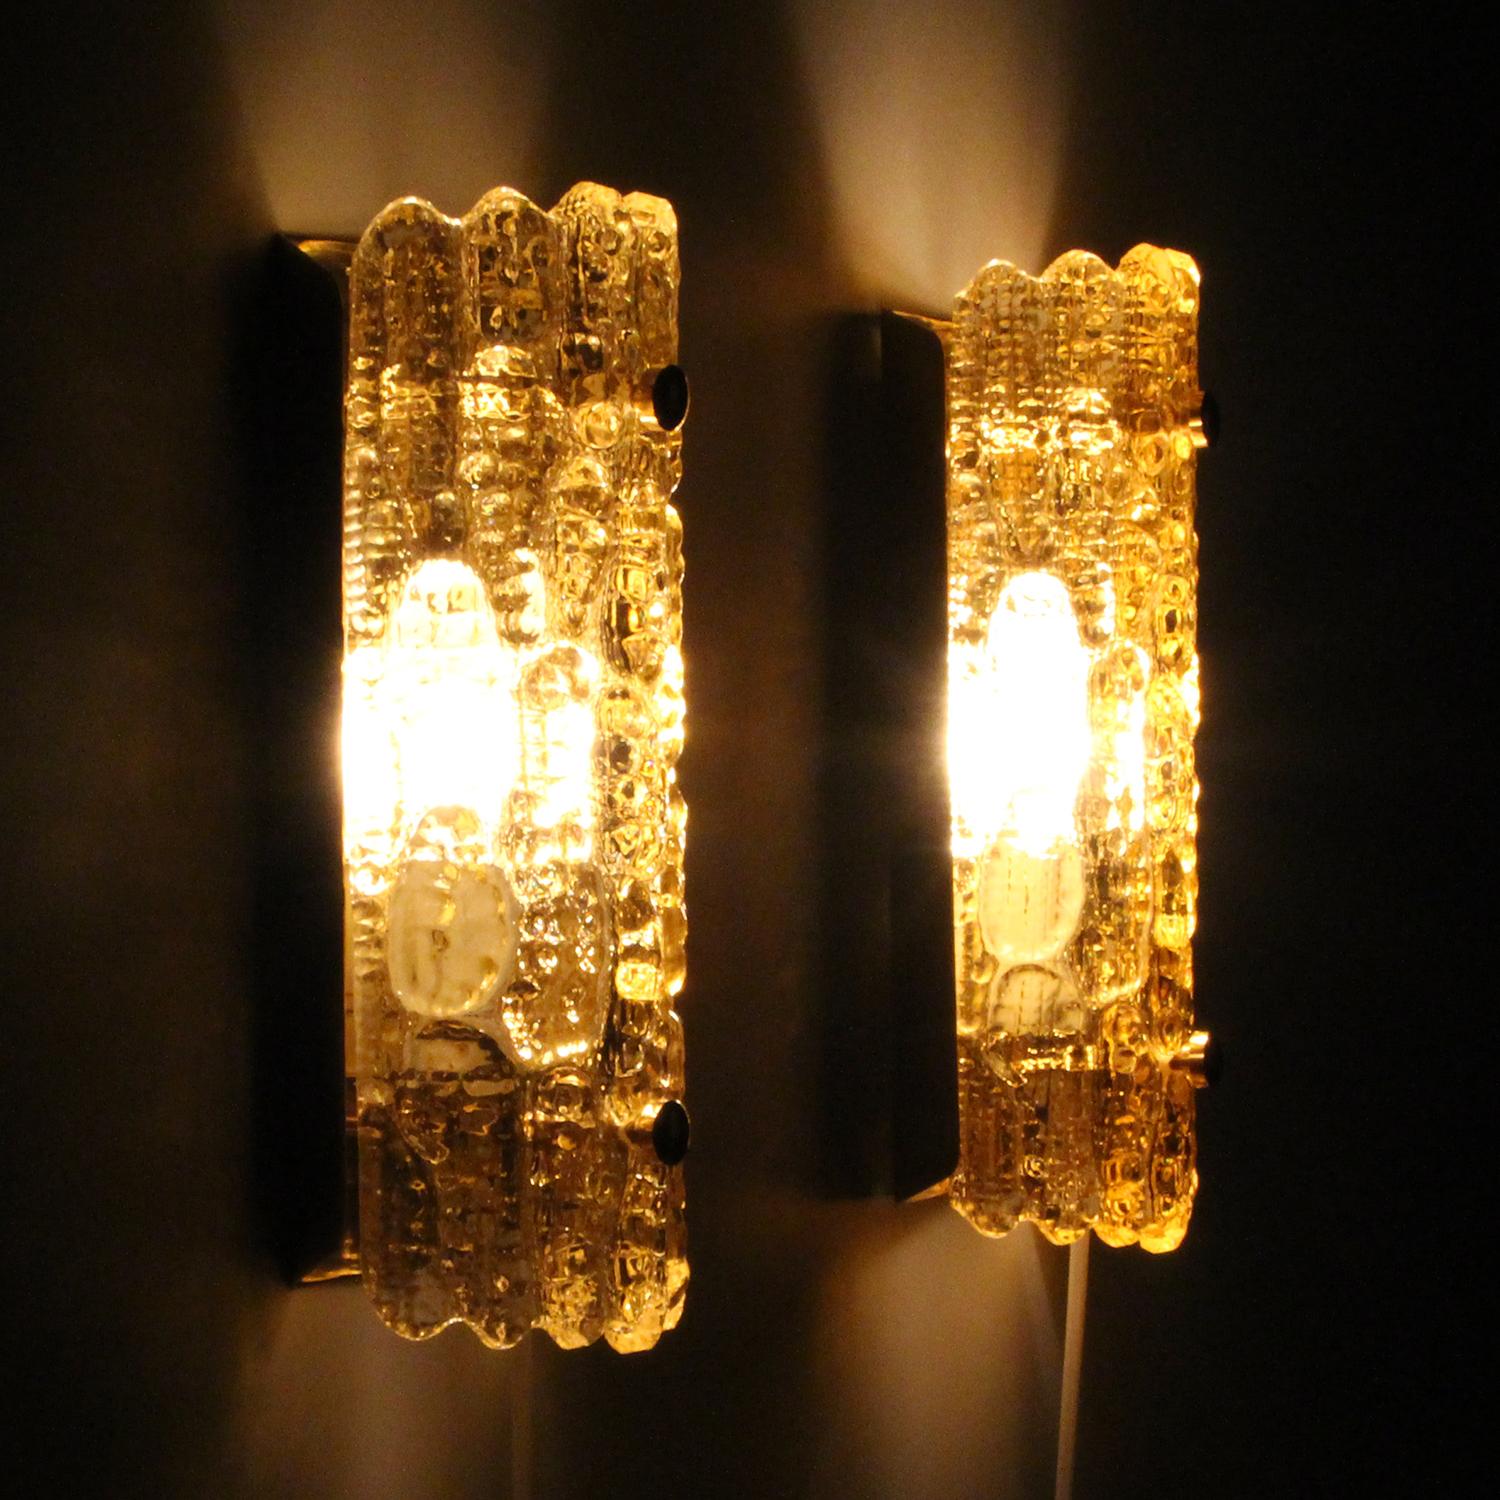 Gefion Sconces (pair) - pair of champagne colored crystal glass wall lamps by Carl Fagerlund for Lyfa and Swedish Orrefors in the 1960s, in very good vintage condition.

Each sconce is made of a thick champagne colored crystal glass piece, curved